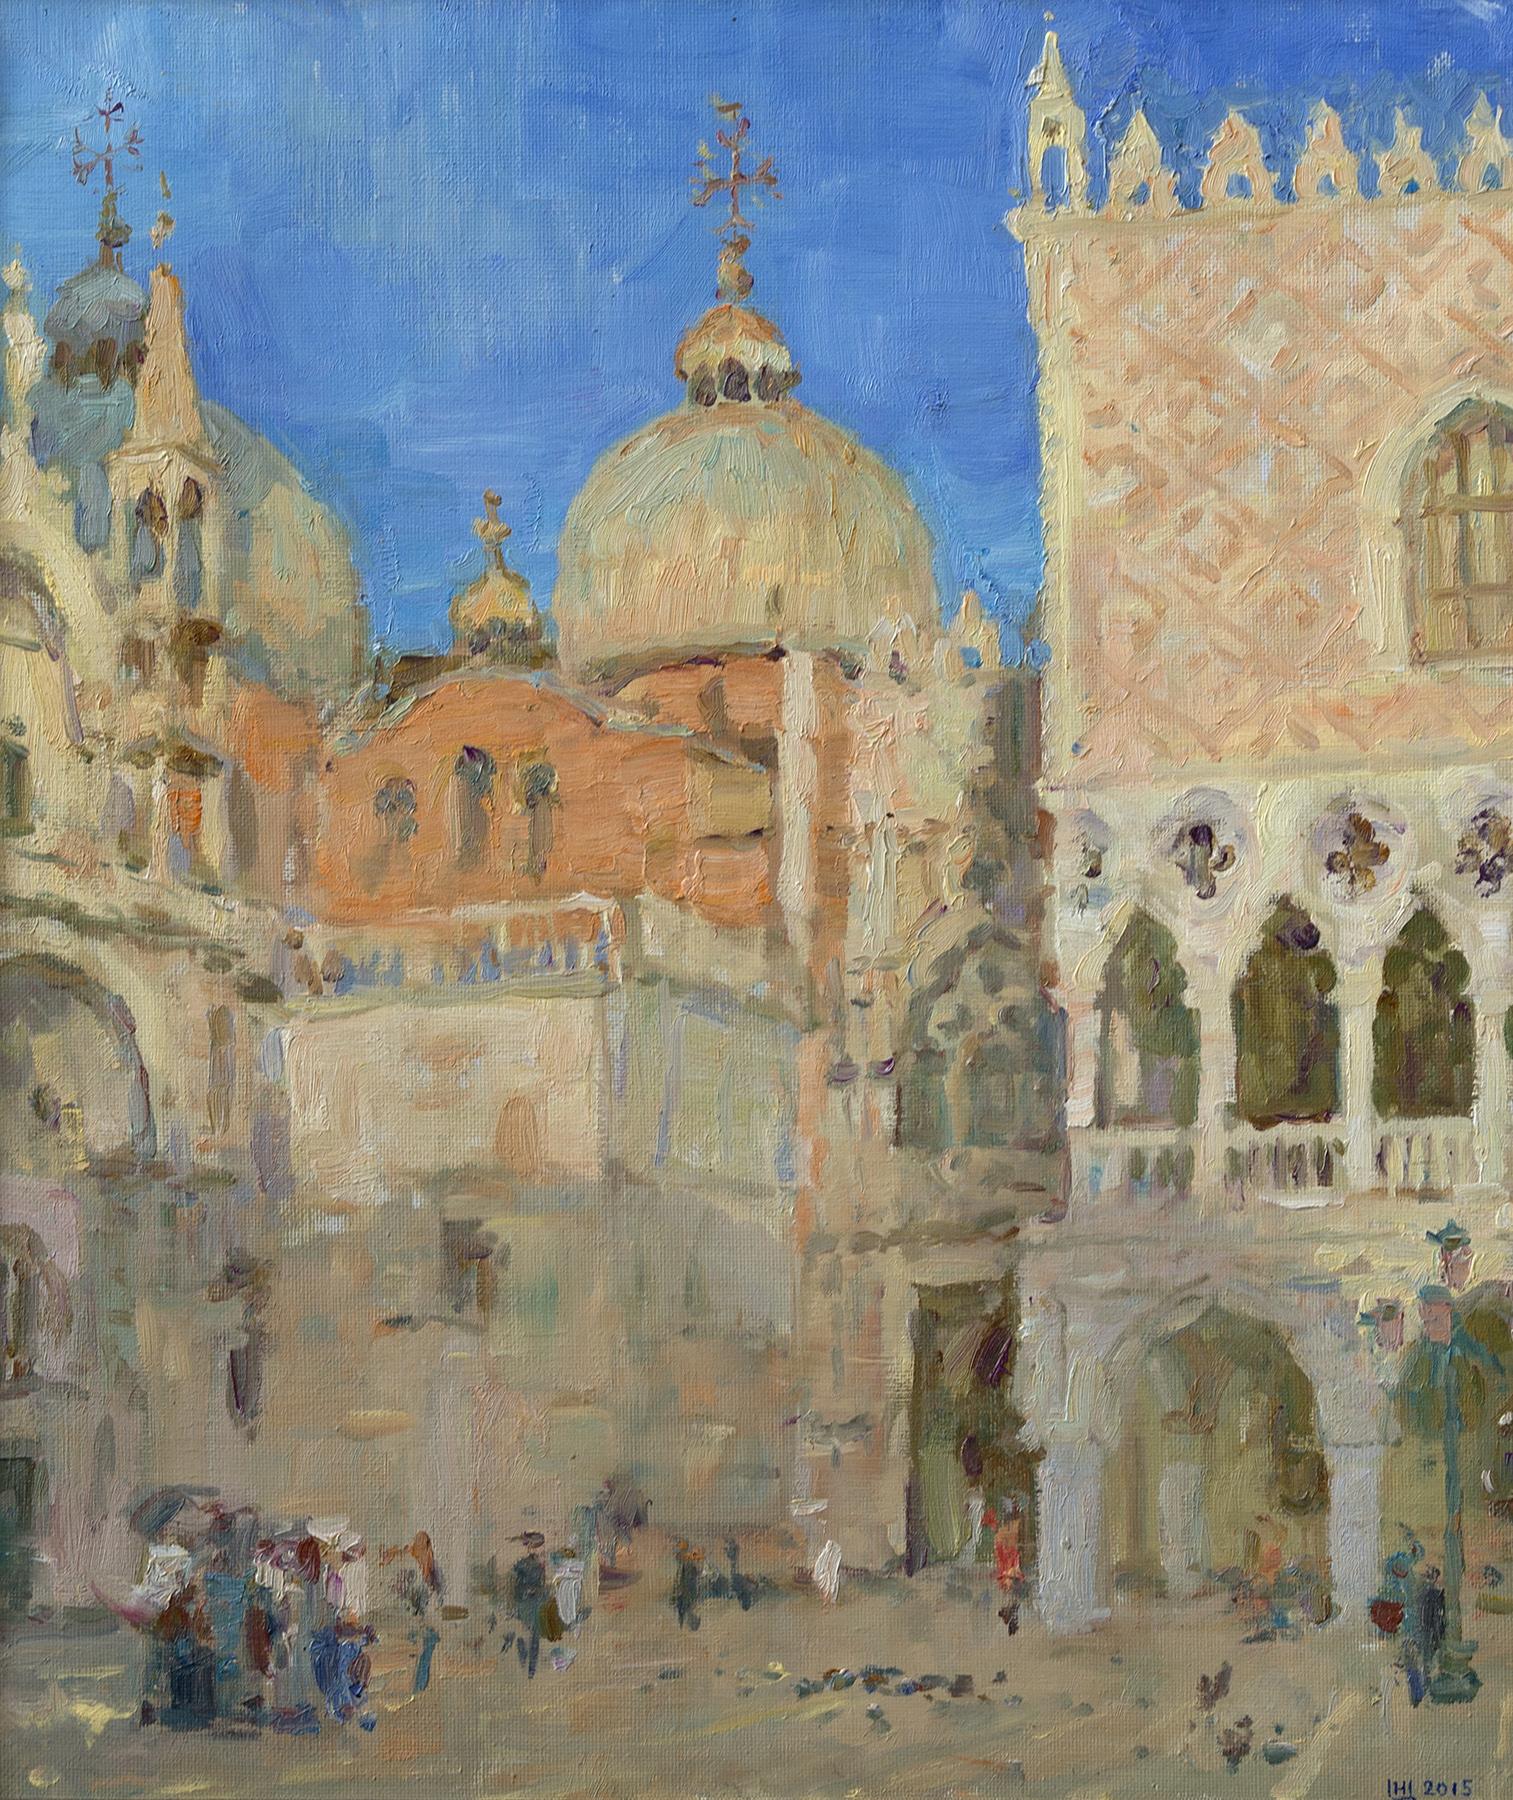 San Marco and the Doge's Palace. Original modern art painting